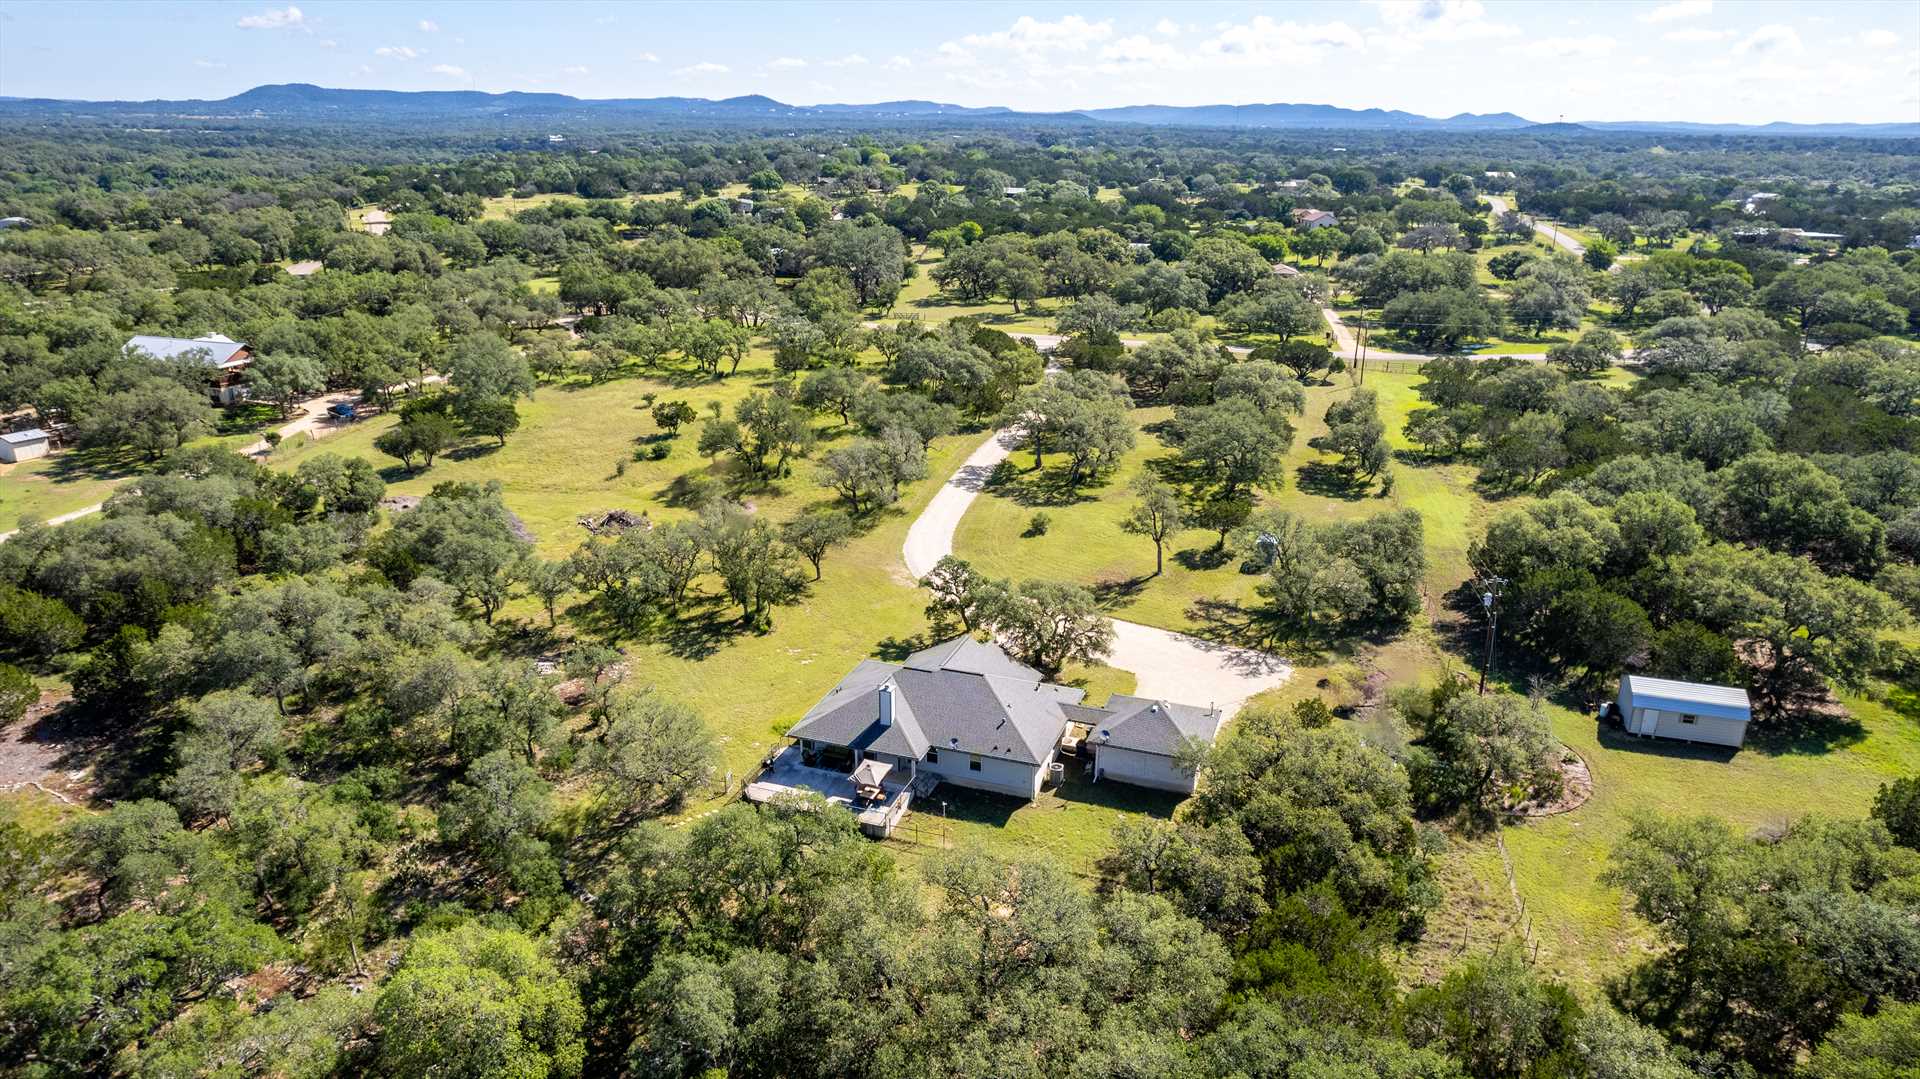                                                 Keep in mind this Hill Country paradise is also a short distance away from great towns like Pipe Creek, Bandera, and Boerne!